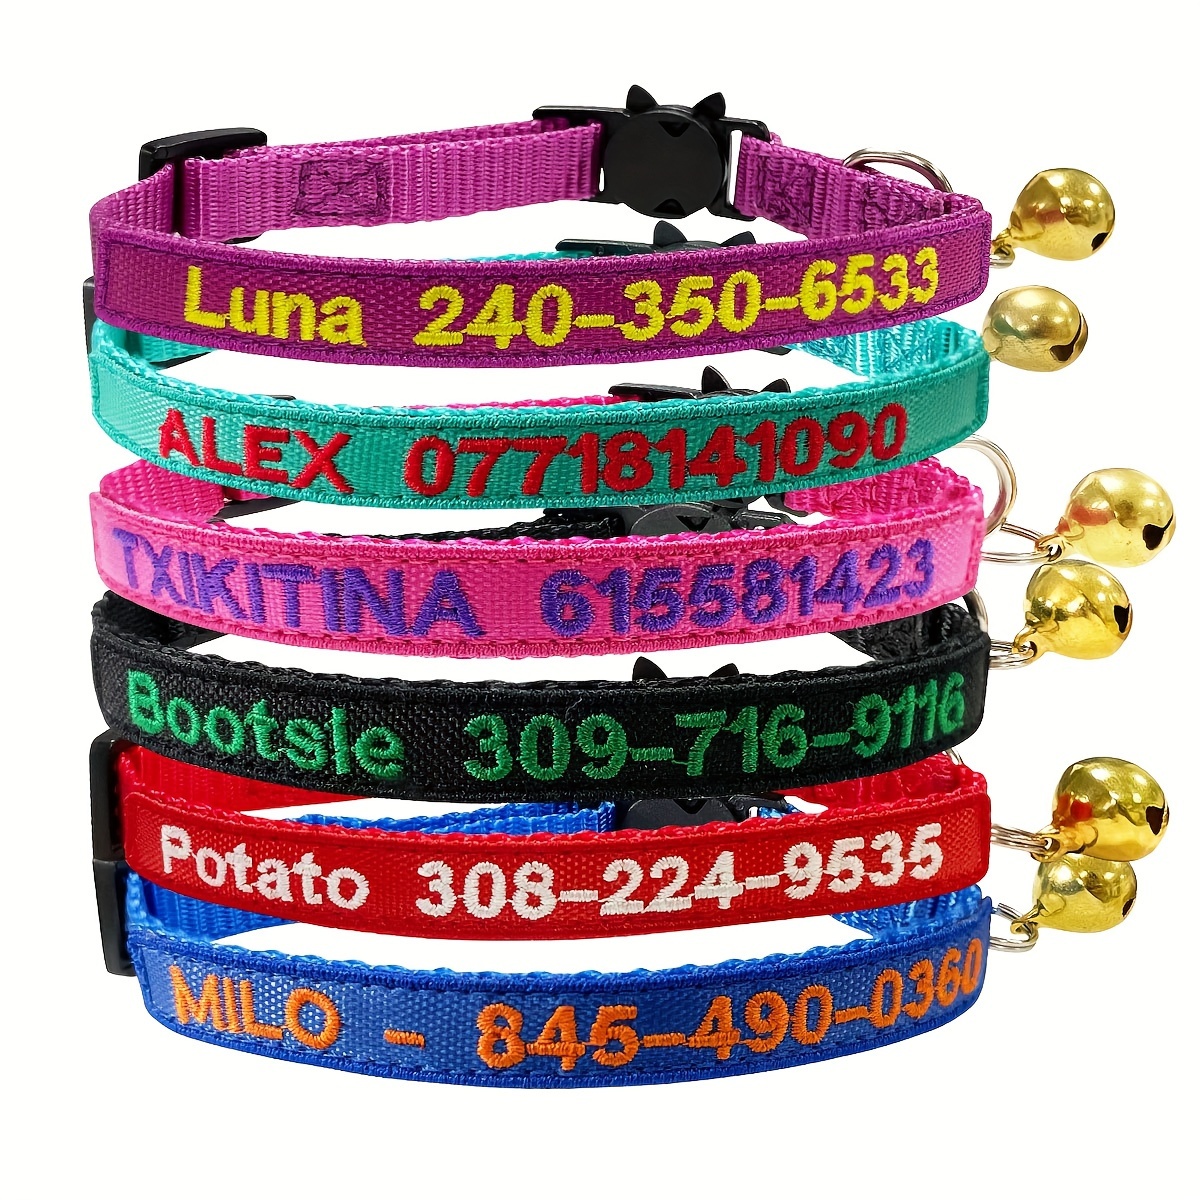 

Custom Engraved Cat Collar With Bell - Personalized Nylon Id Tag For Safety & Style, Includes Name And Phone Number